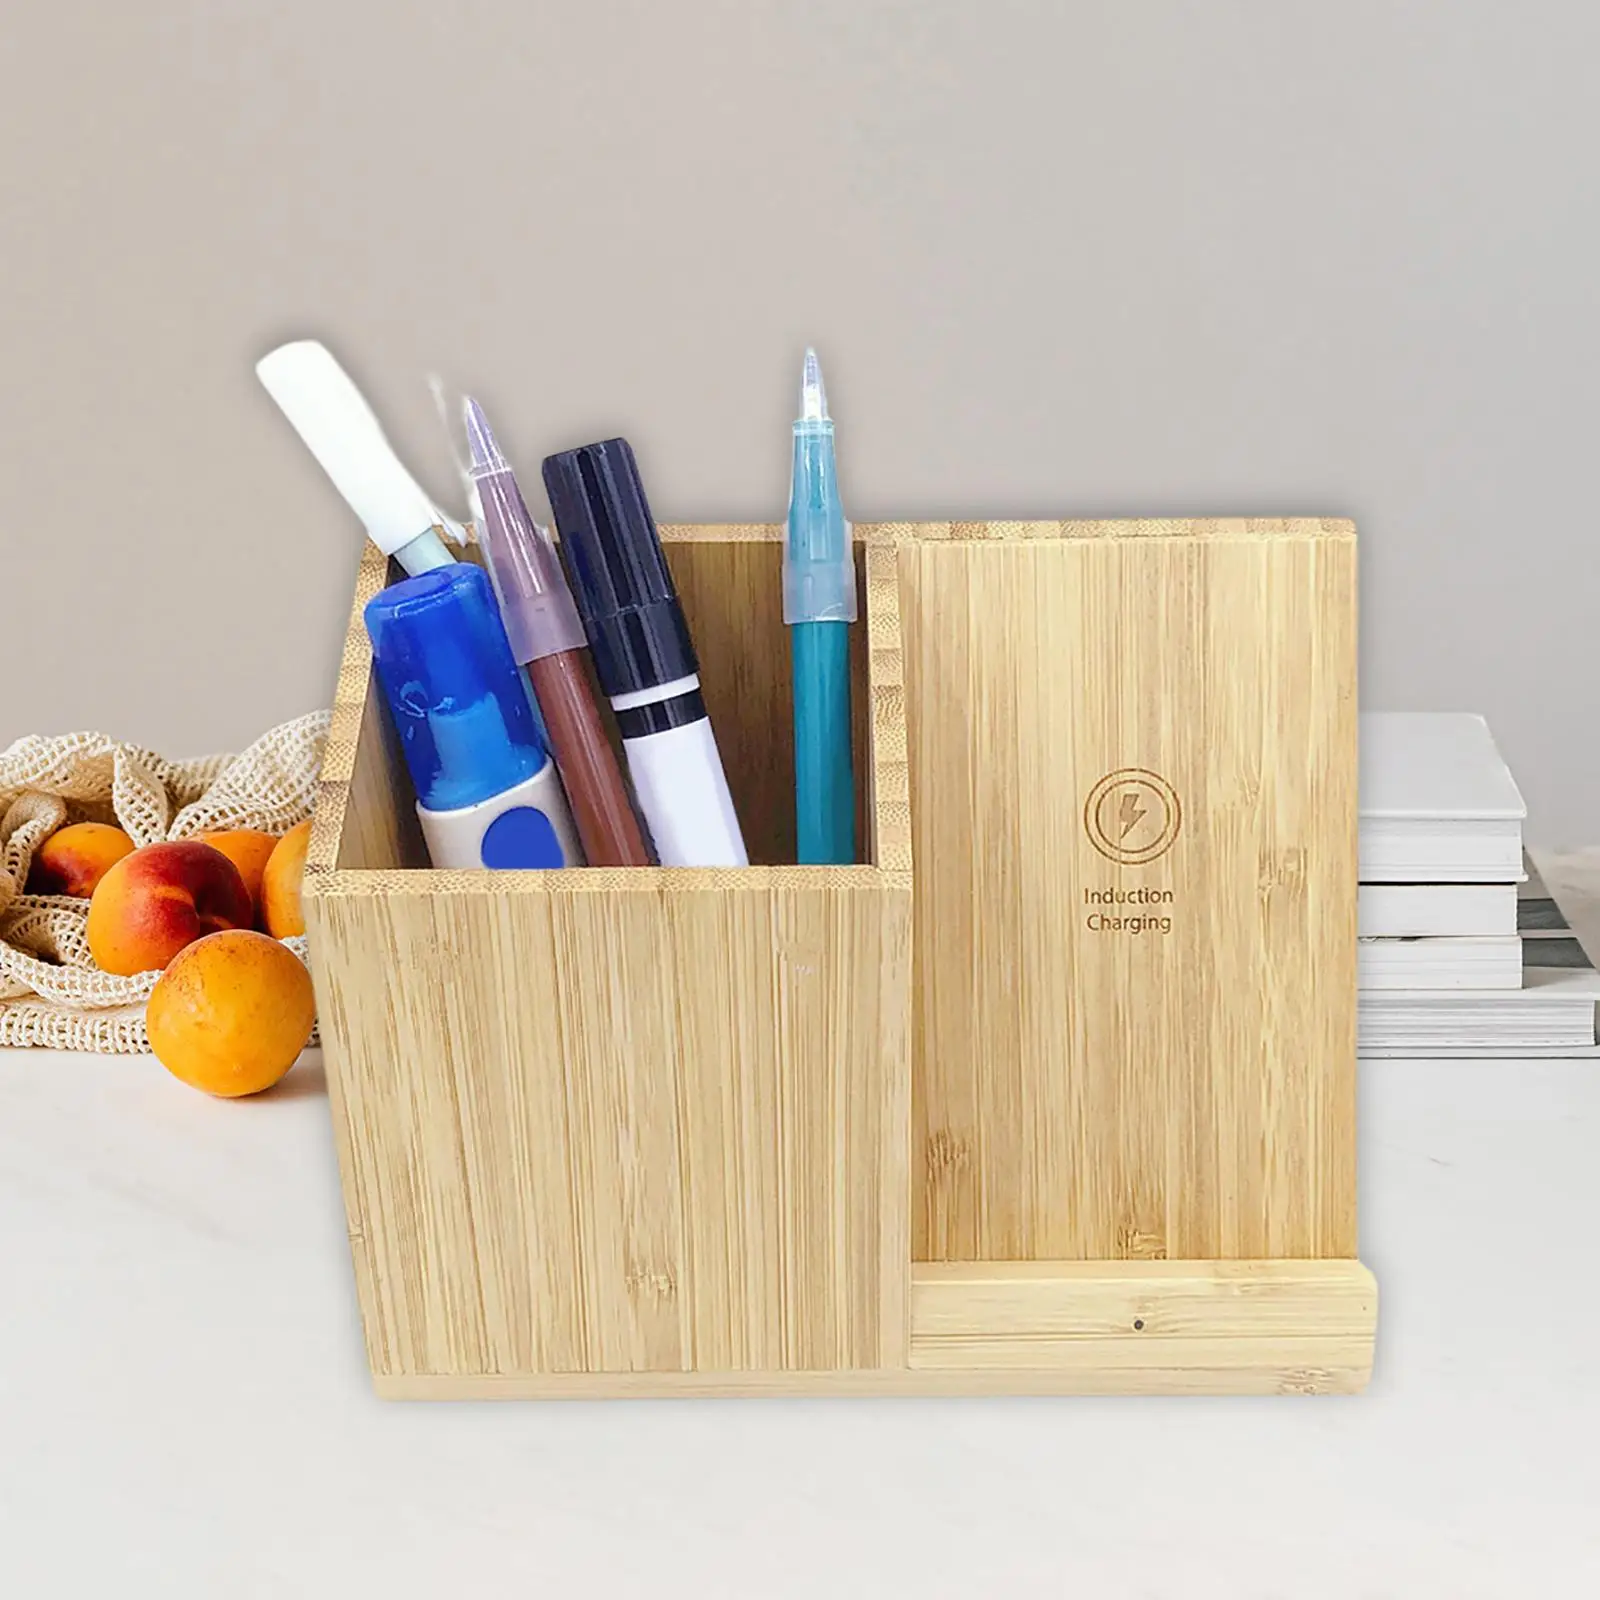 1 Piece Wireless Charger Pen Stand Phone Charging Station Devices 4in1 Organizer Bamboo Stuff for Pencil Storage Universal Phone